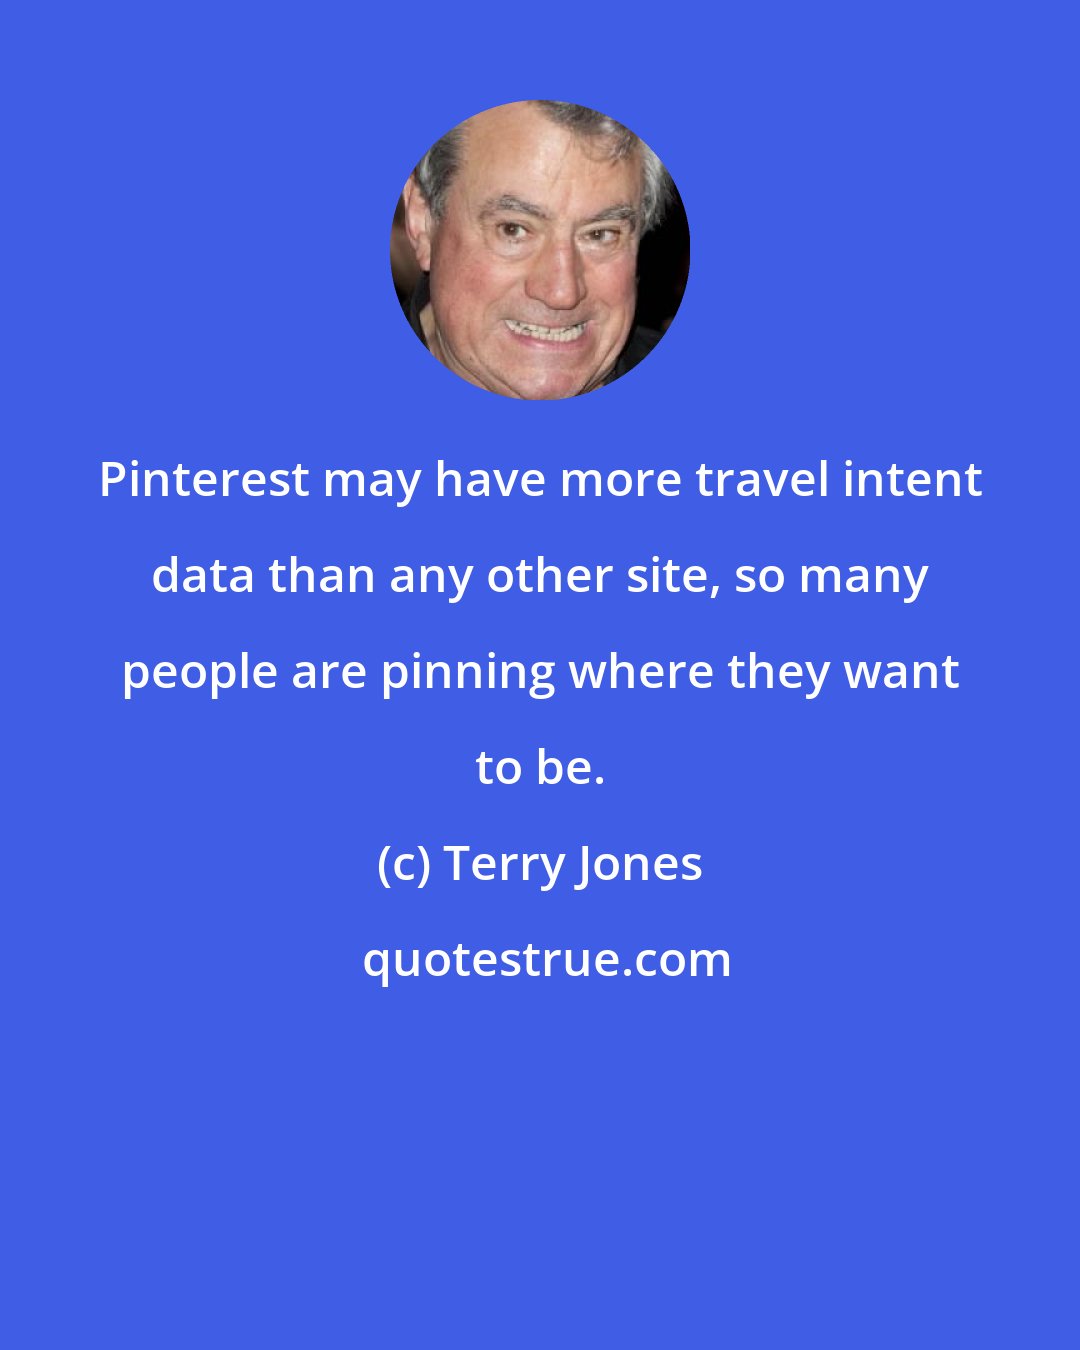 Terry Jones: Pinterest may have more travel intent data than any other site, so many people are pinning where they want to be.